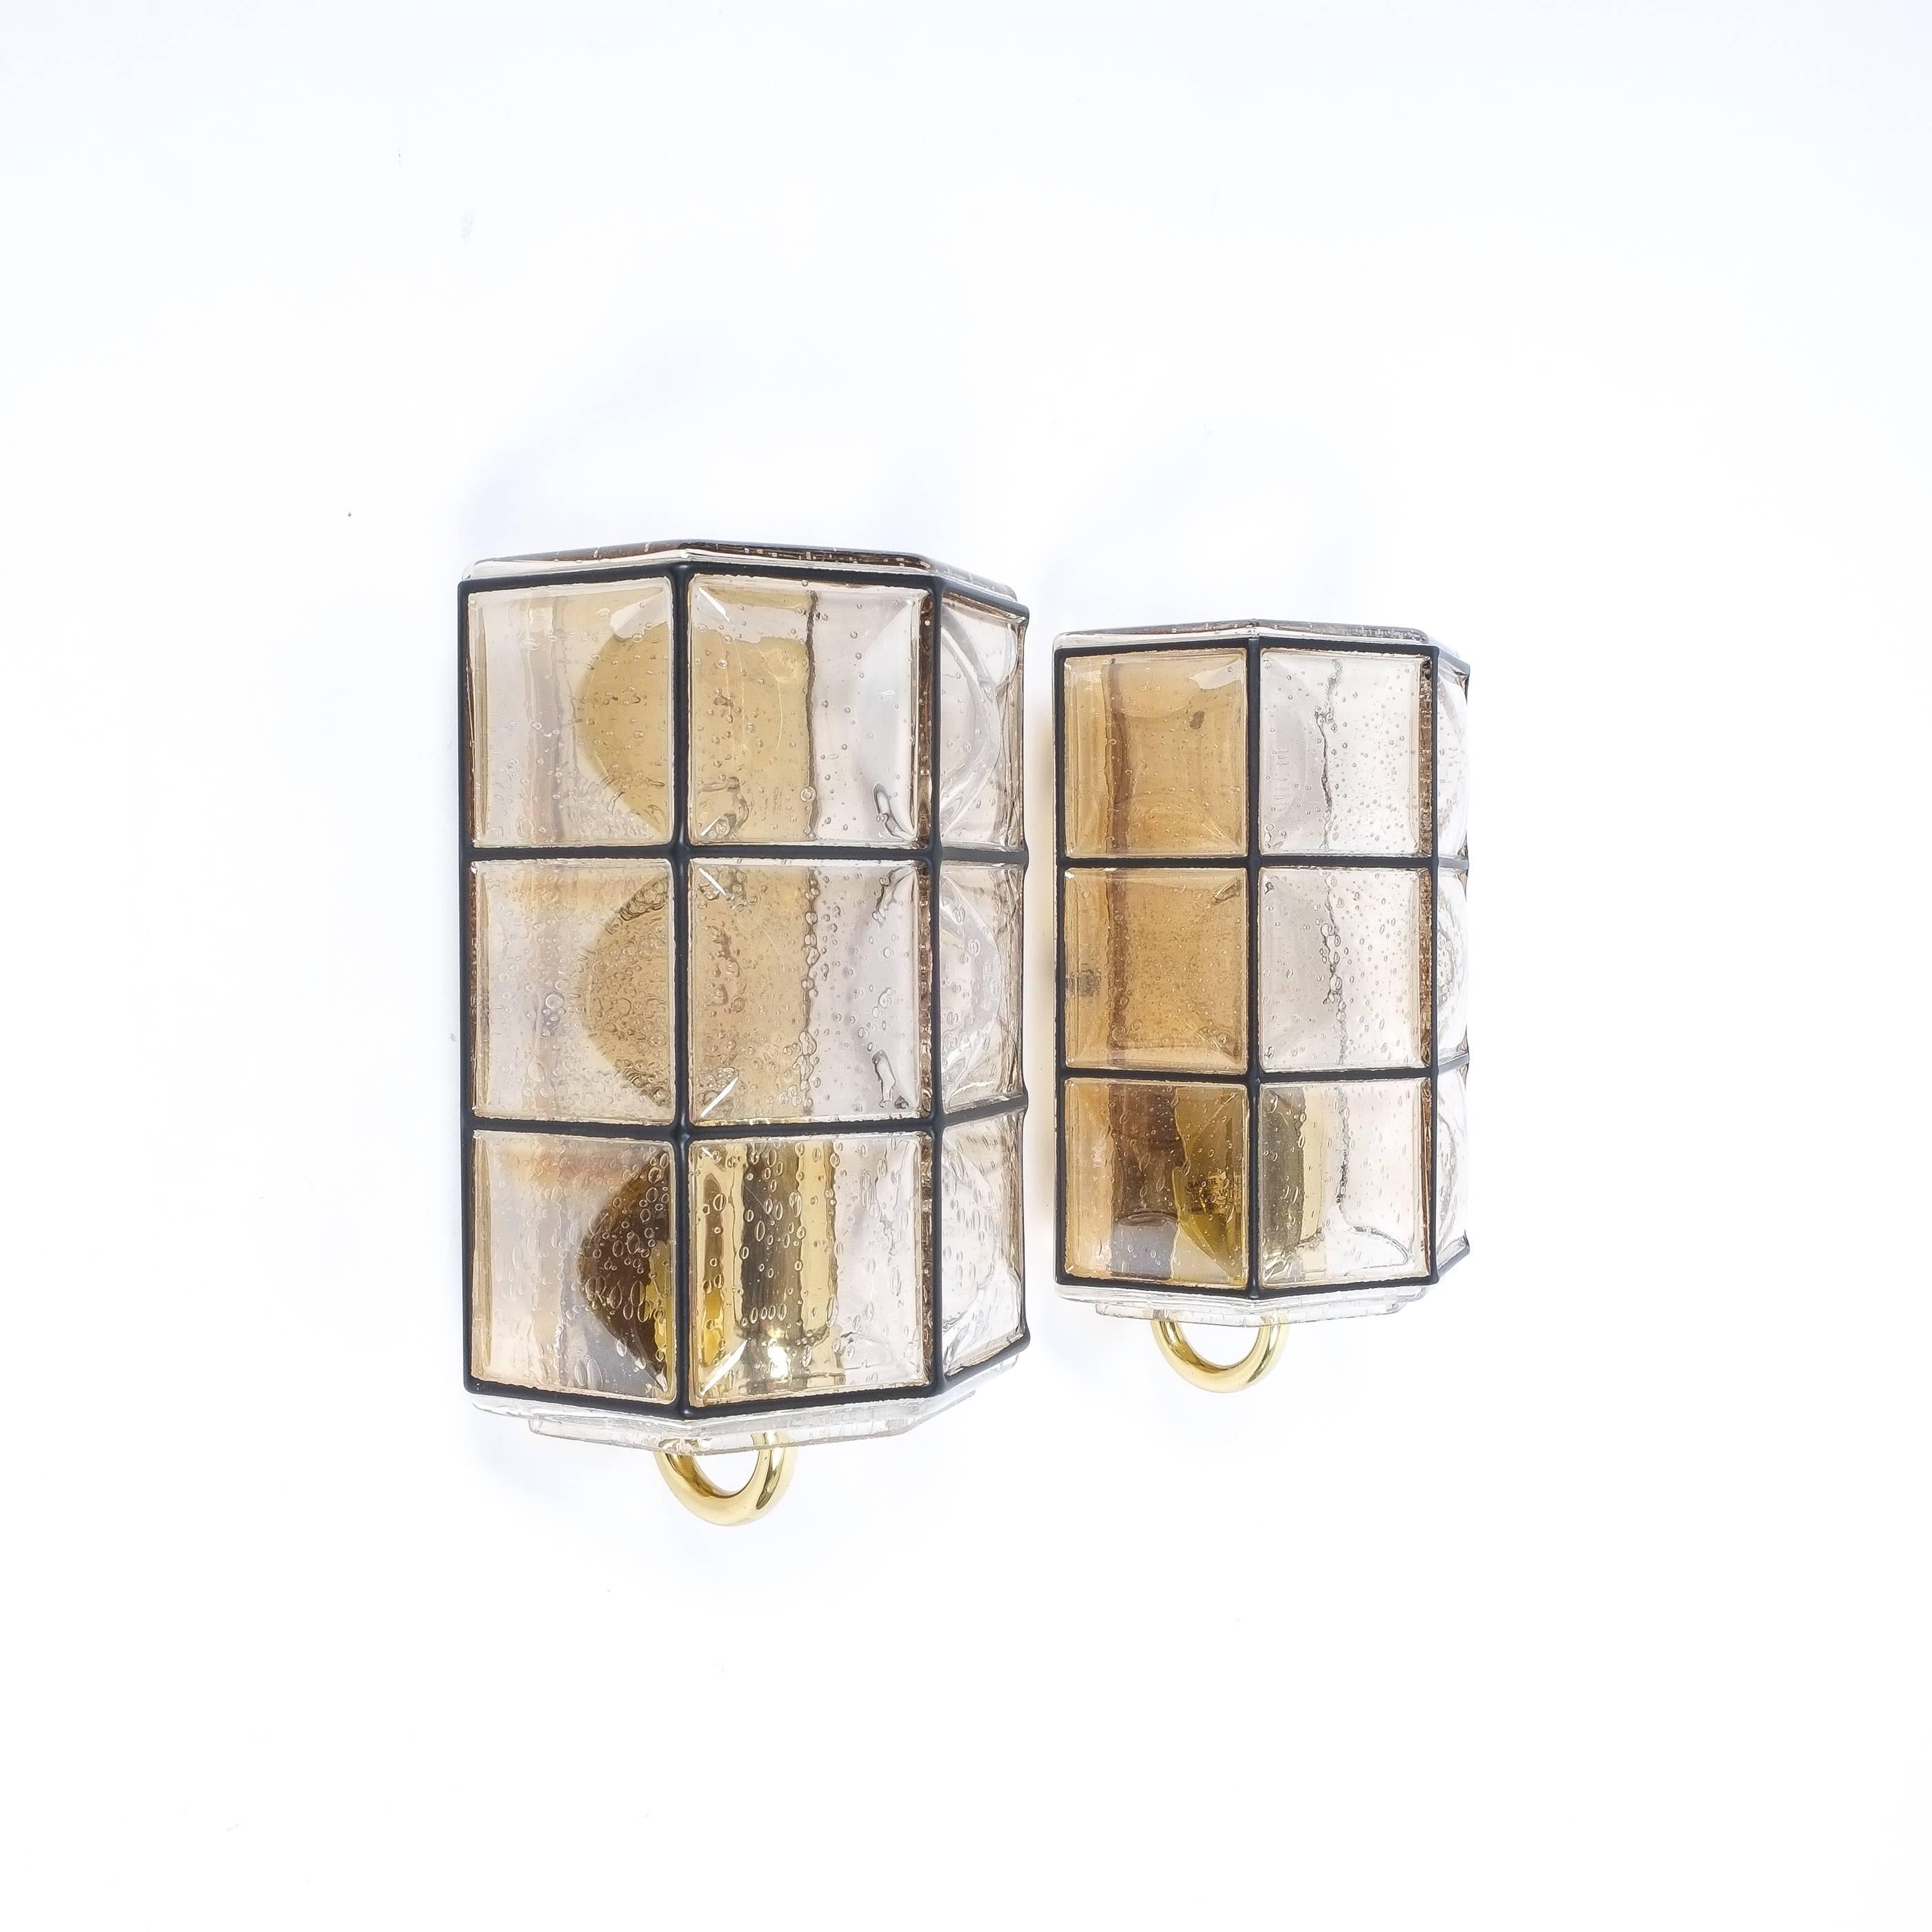 Beautiful pair of glass and brass wall fixtures by Limburg, Germany, 1960. They have been comprised of slightly amber colored glass with black grid accents and polished brass hardware. They are in excellent refurbished, rewired (110-220V) condition